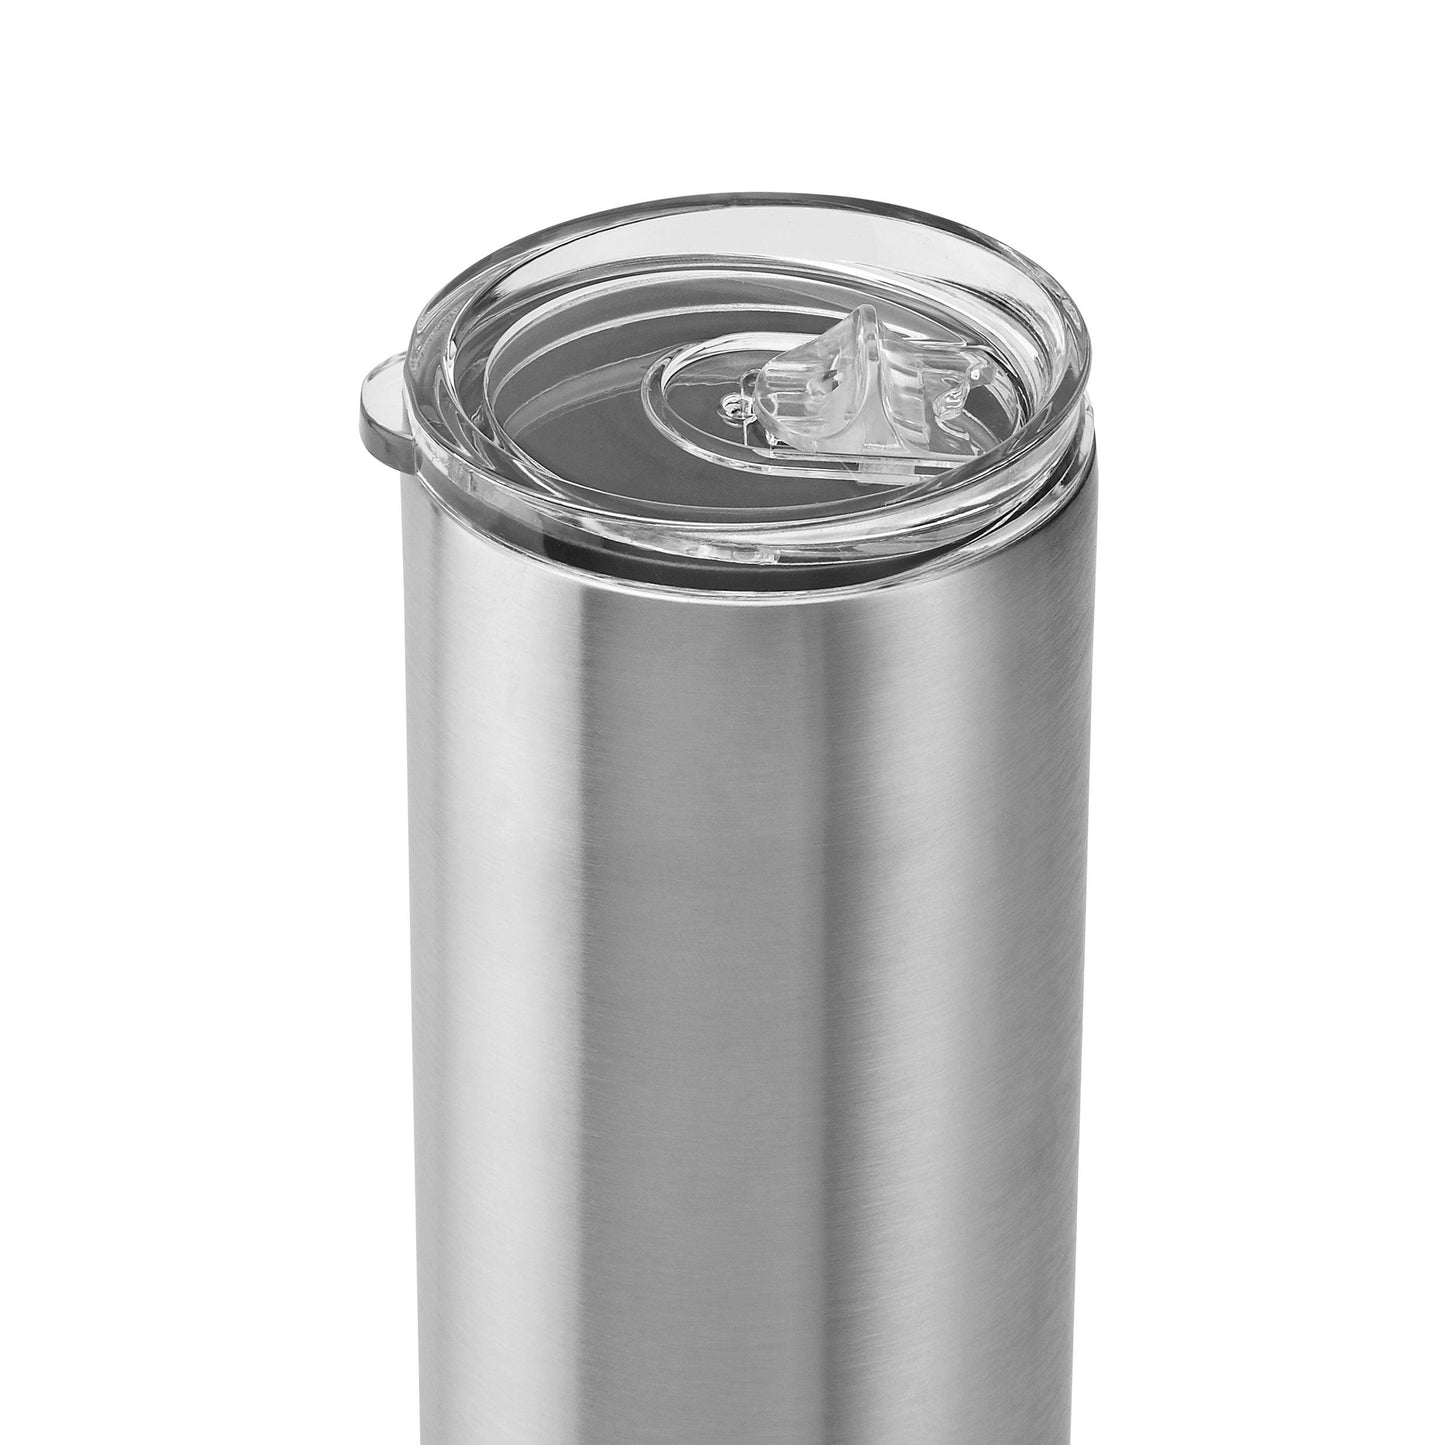 STAINLESS STEEL TUMBLR – Shop Snazzies